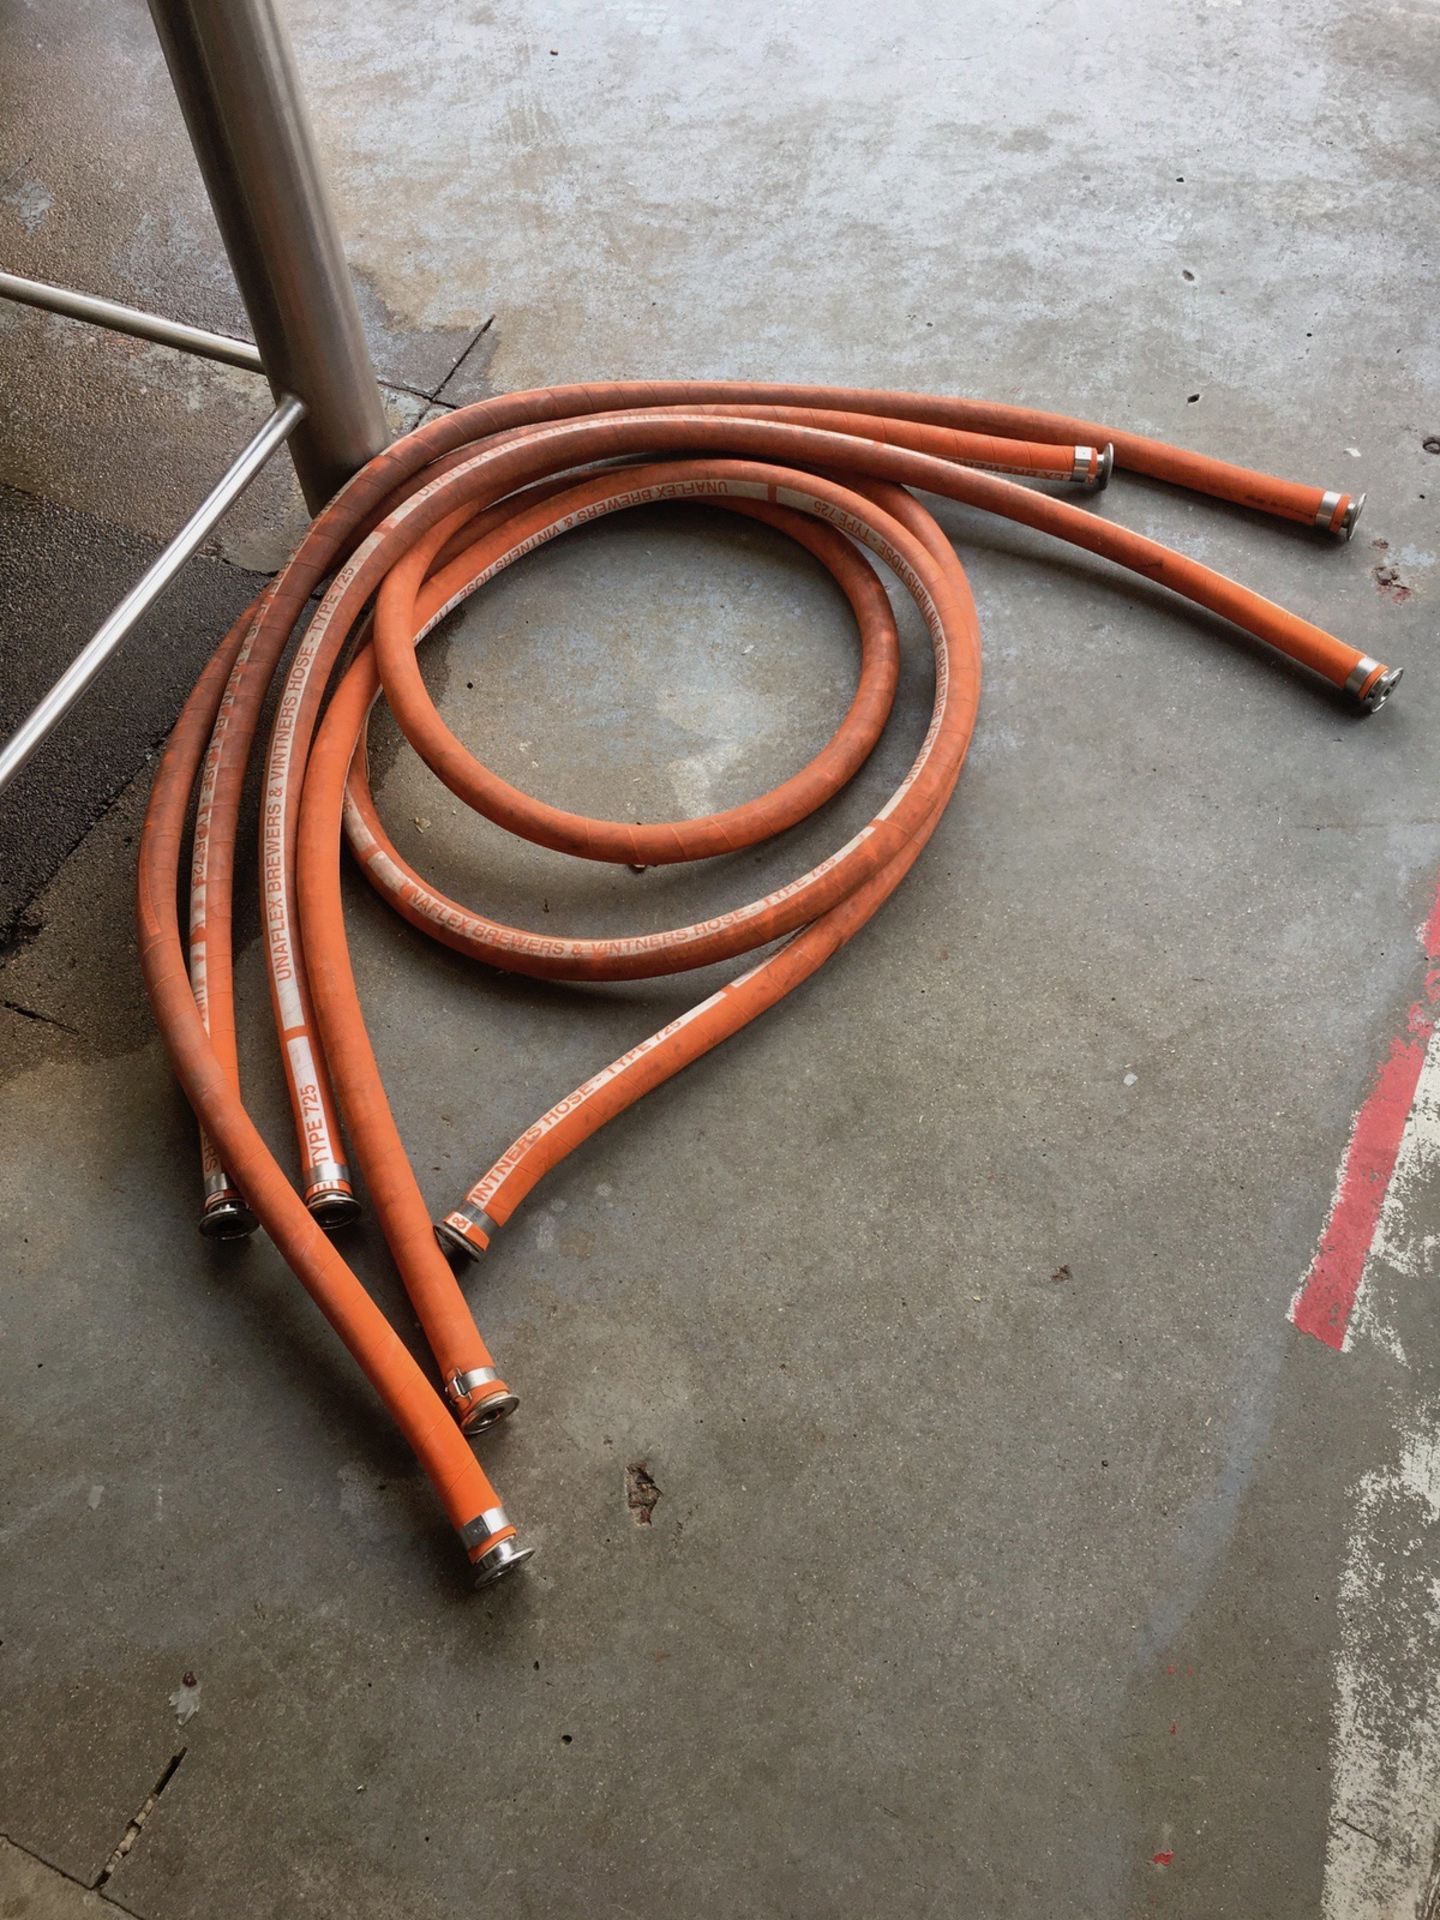 Unaflex Brewers/Vinters Hoses, Type 725 | Subject to Bulk | Rig Fee: $25 or Hand Carry